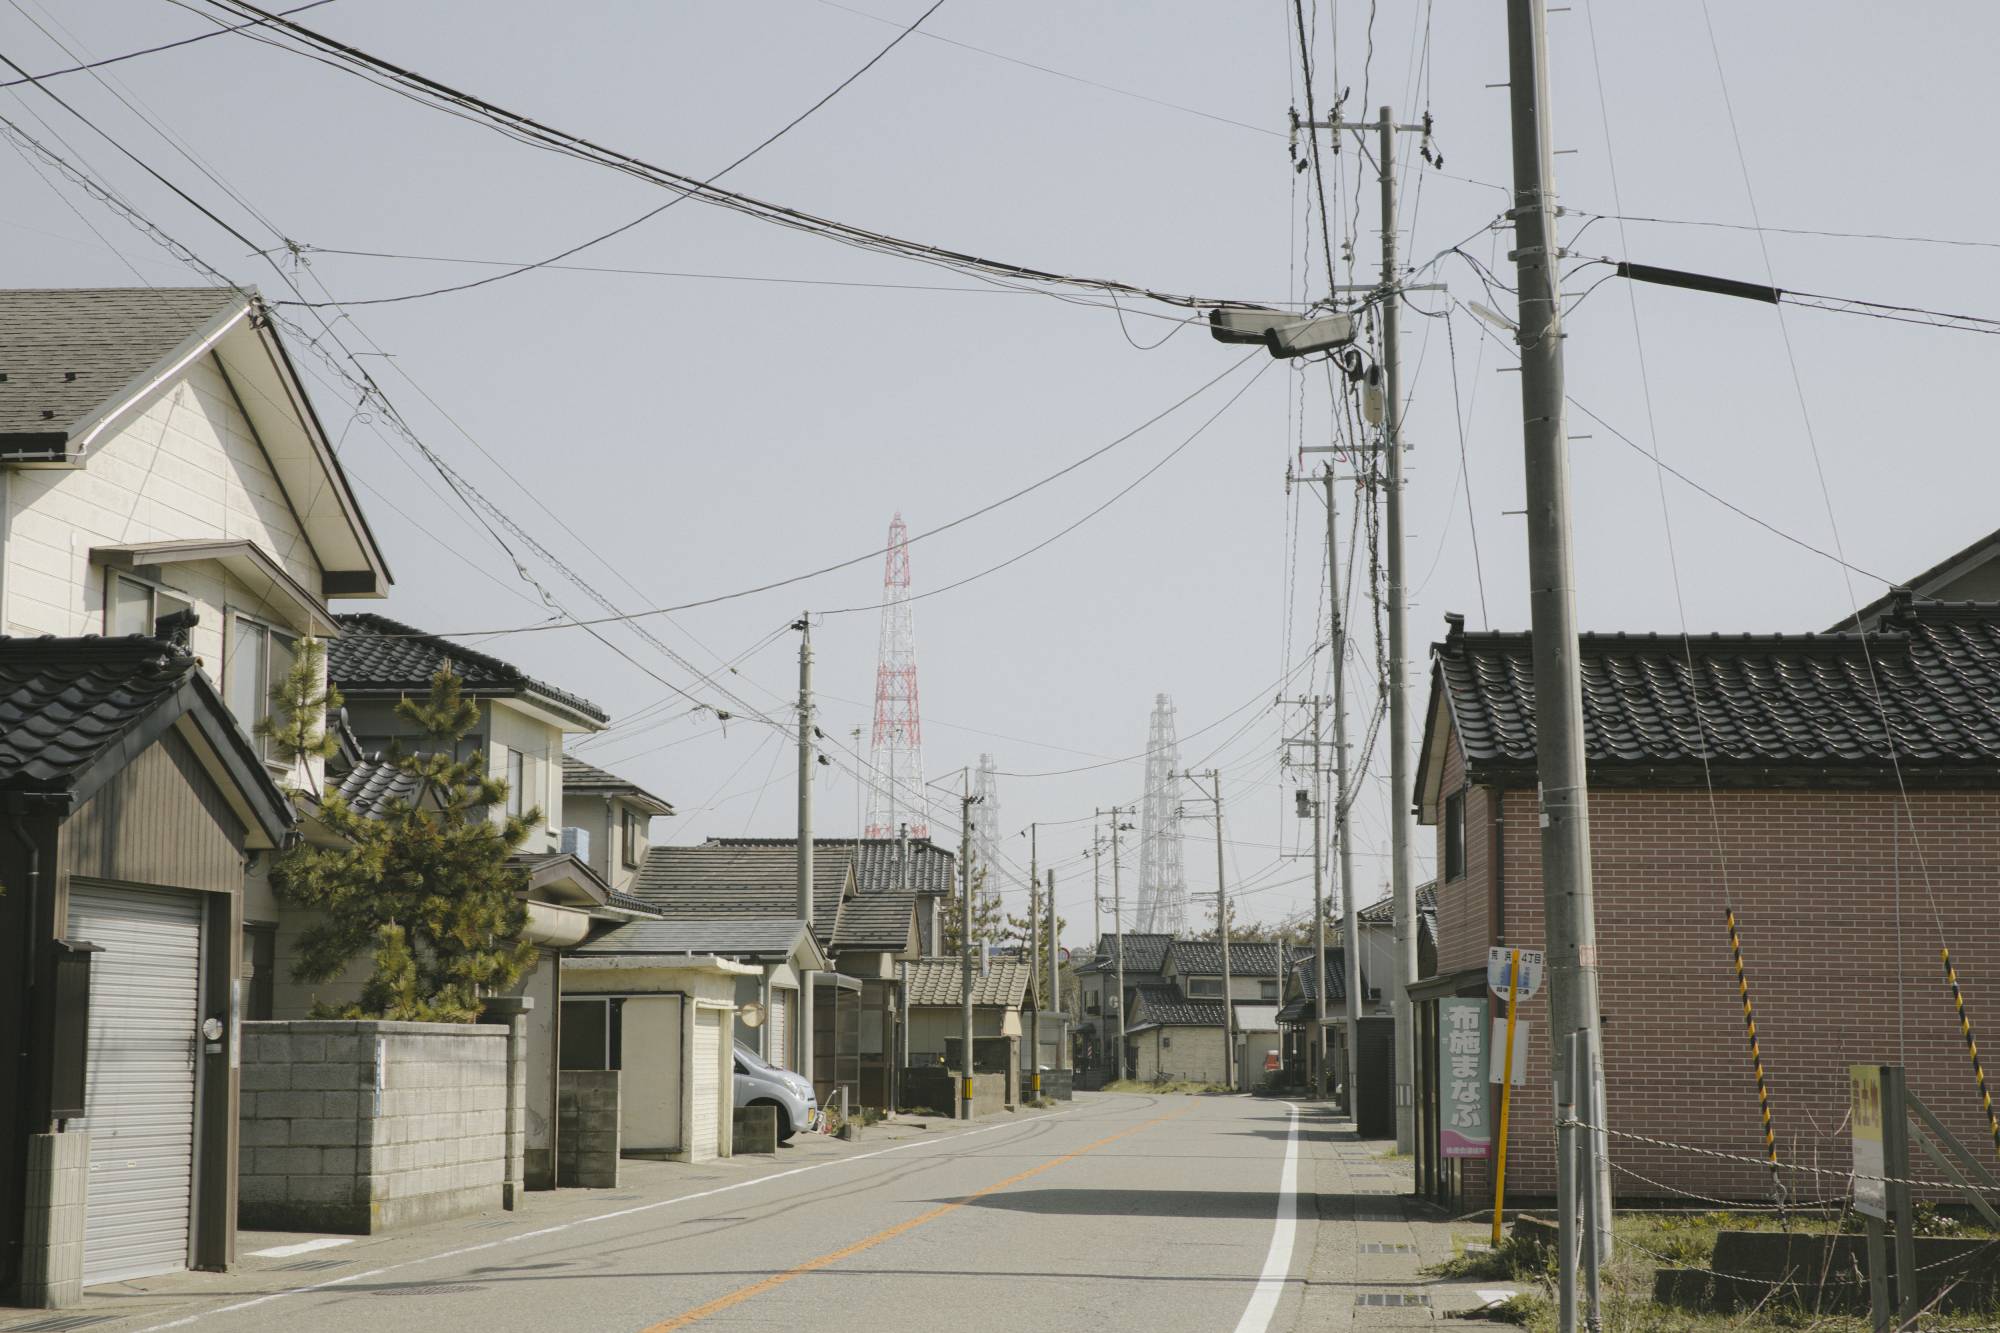 An idled nuclear power plant, including its large steel towers, looms over nearby communities in Kashiwazaki, Niigata Prefecture.  | HARUKA SAKAGUCHI / THE NEW YORK TIMES